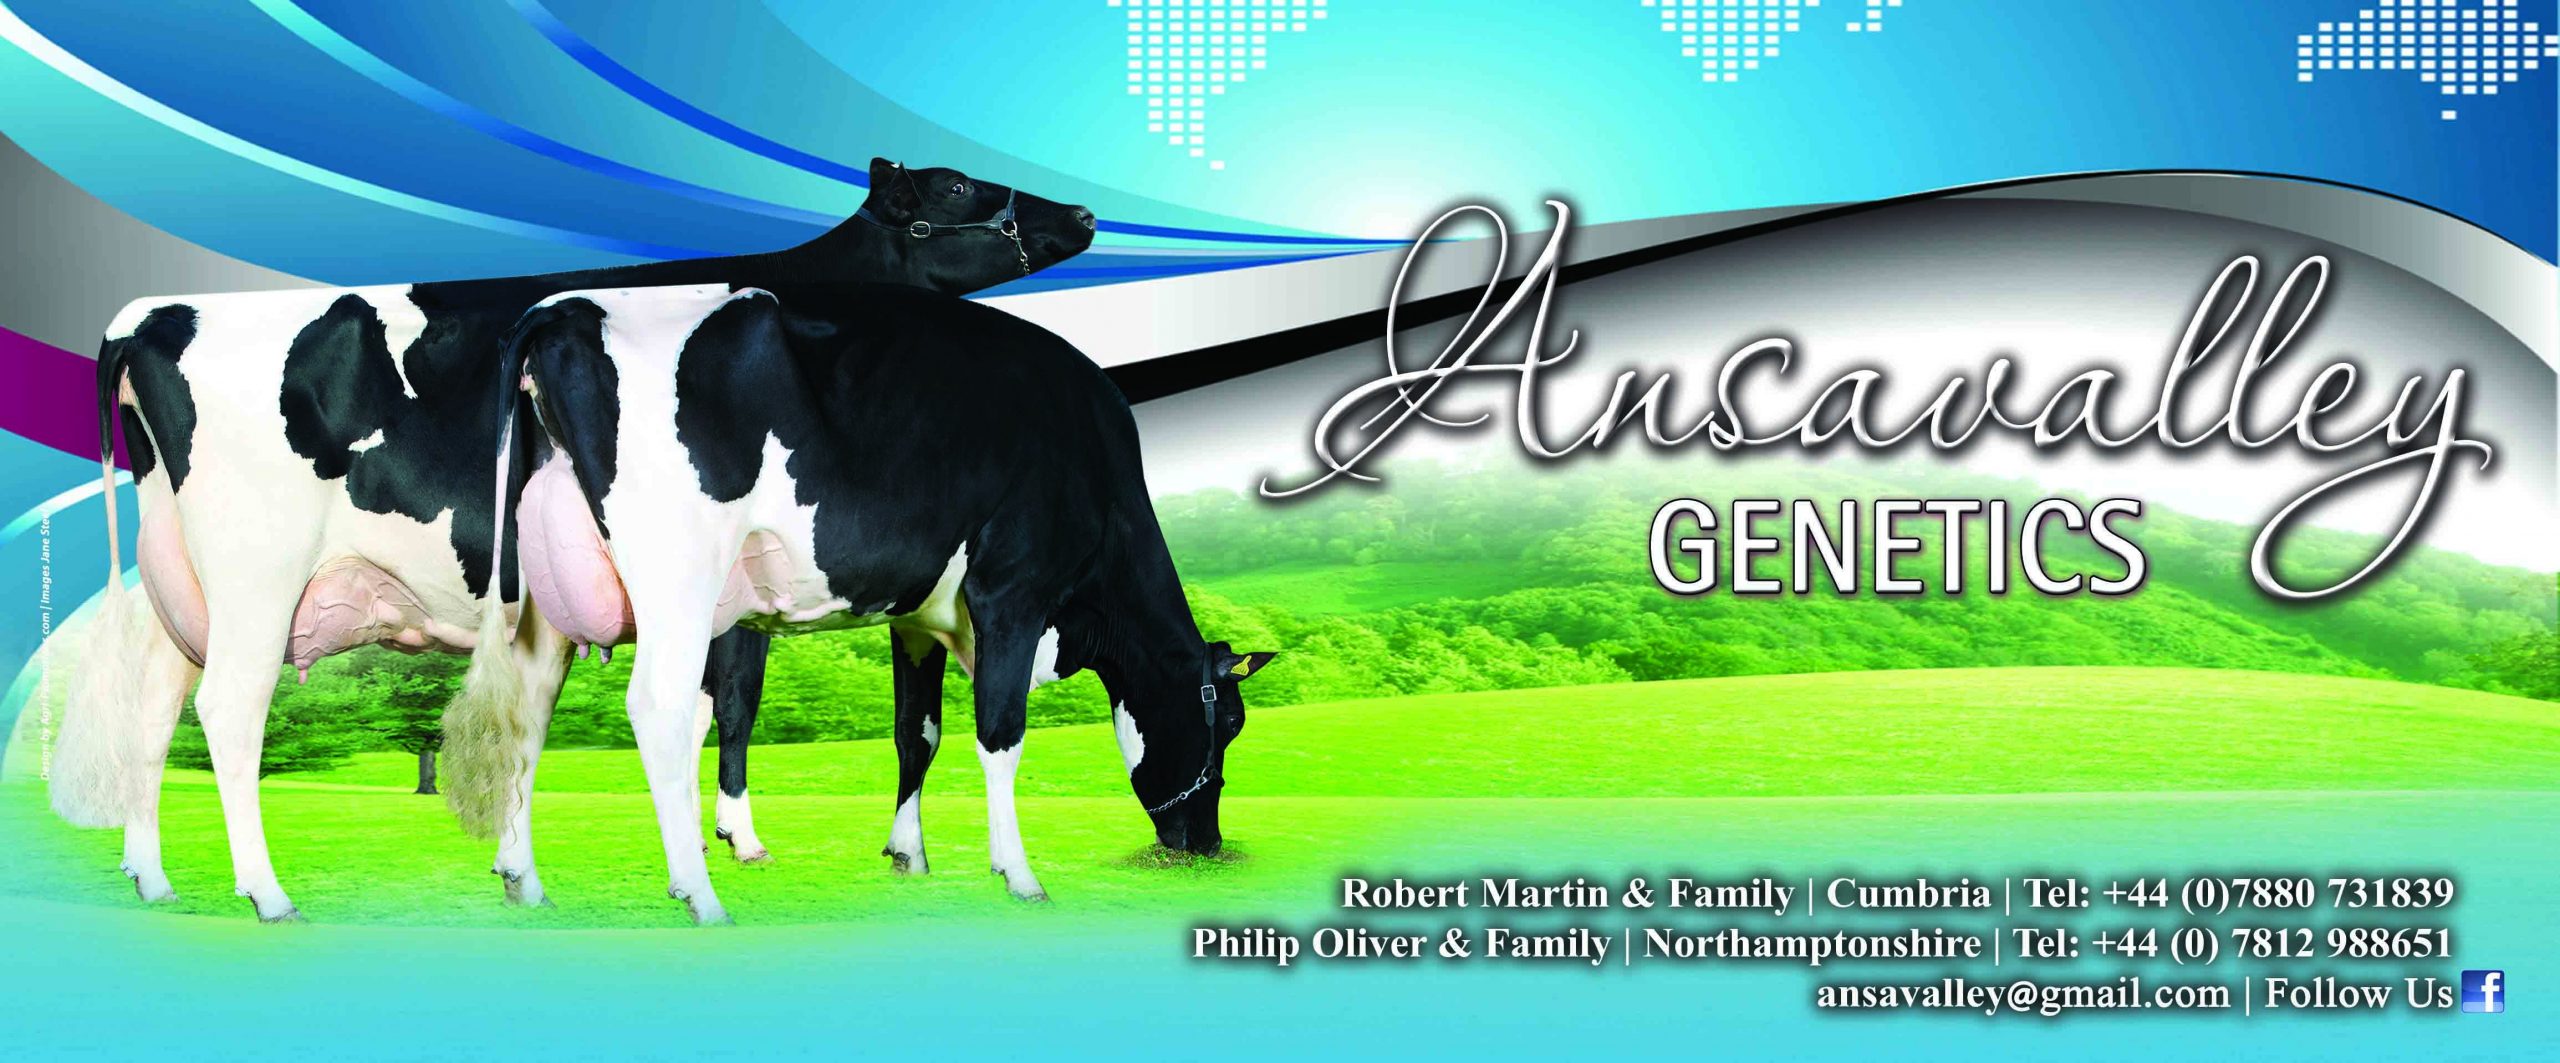 products-ansavalley_banner_5x2_lr